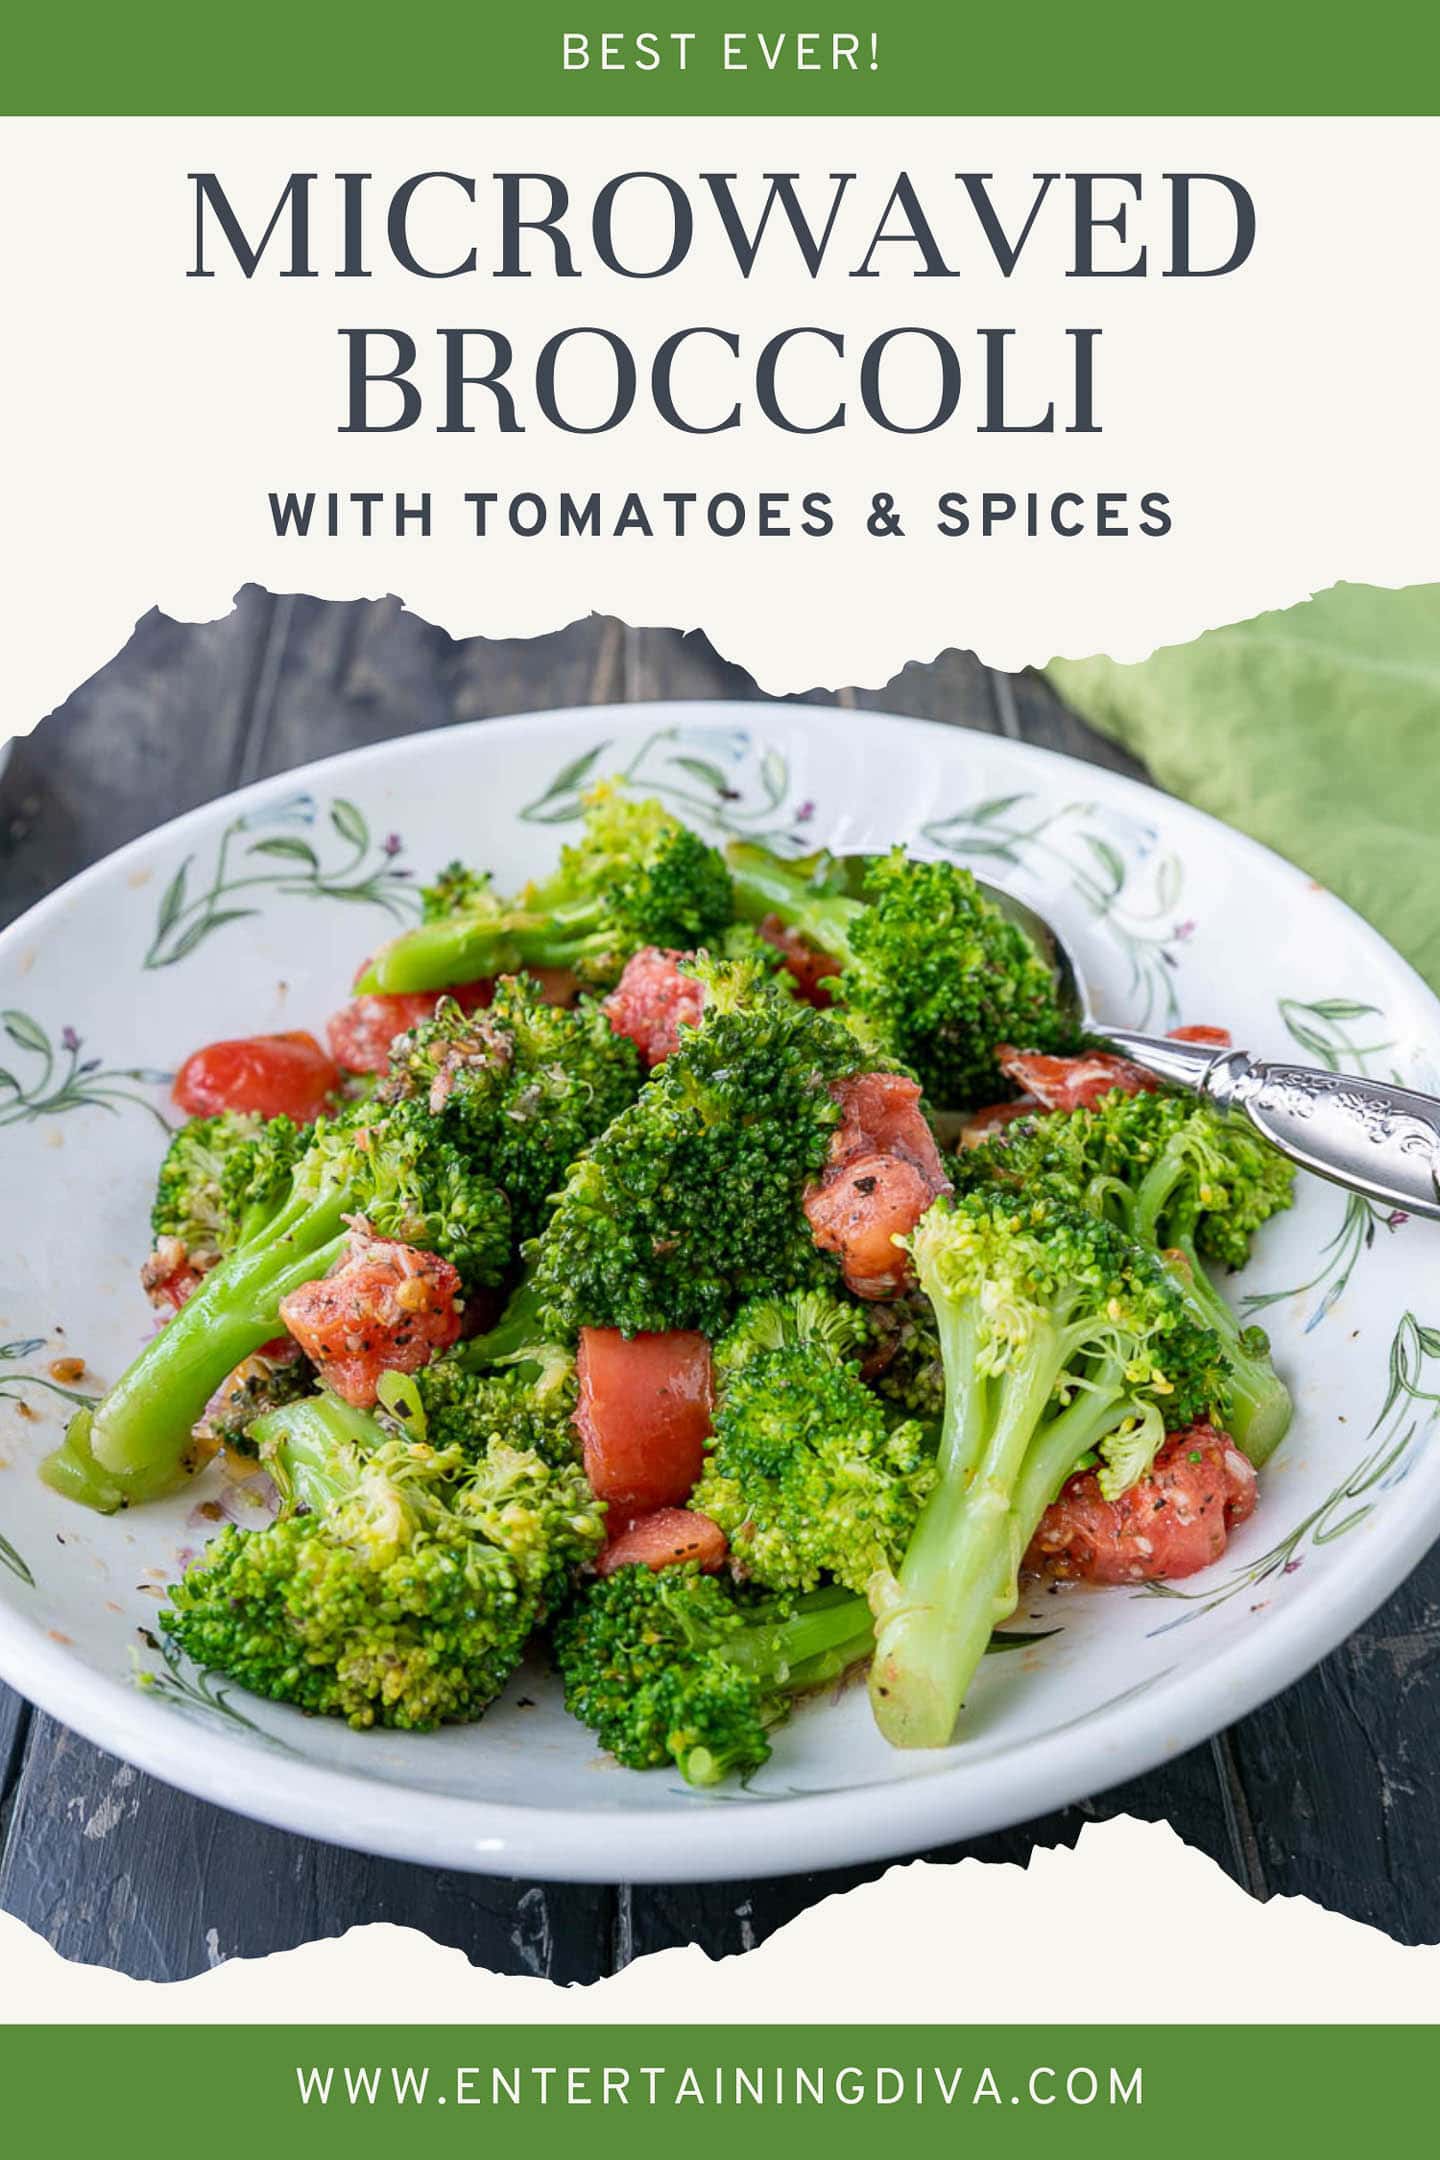 microwaved broccoli with tomatoes and spices